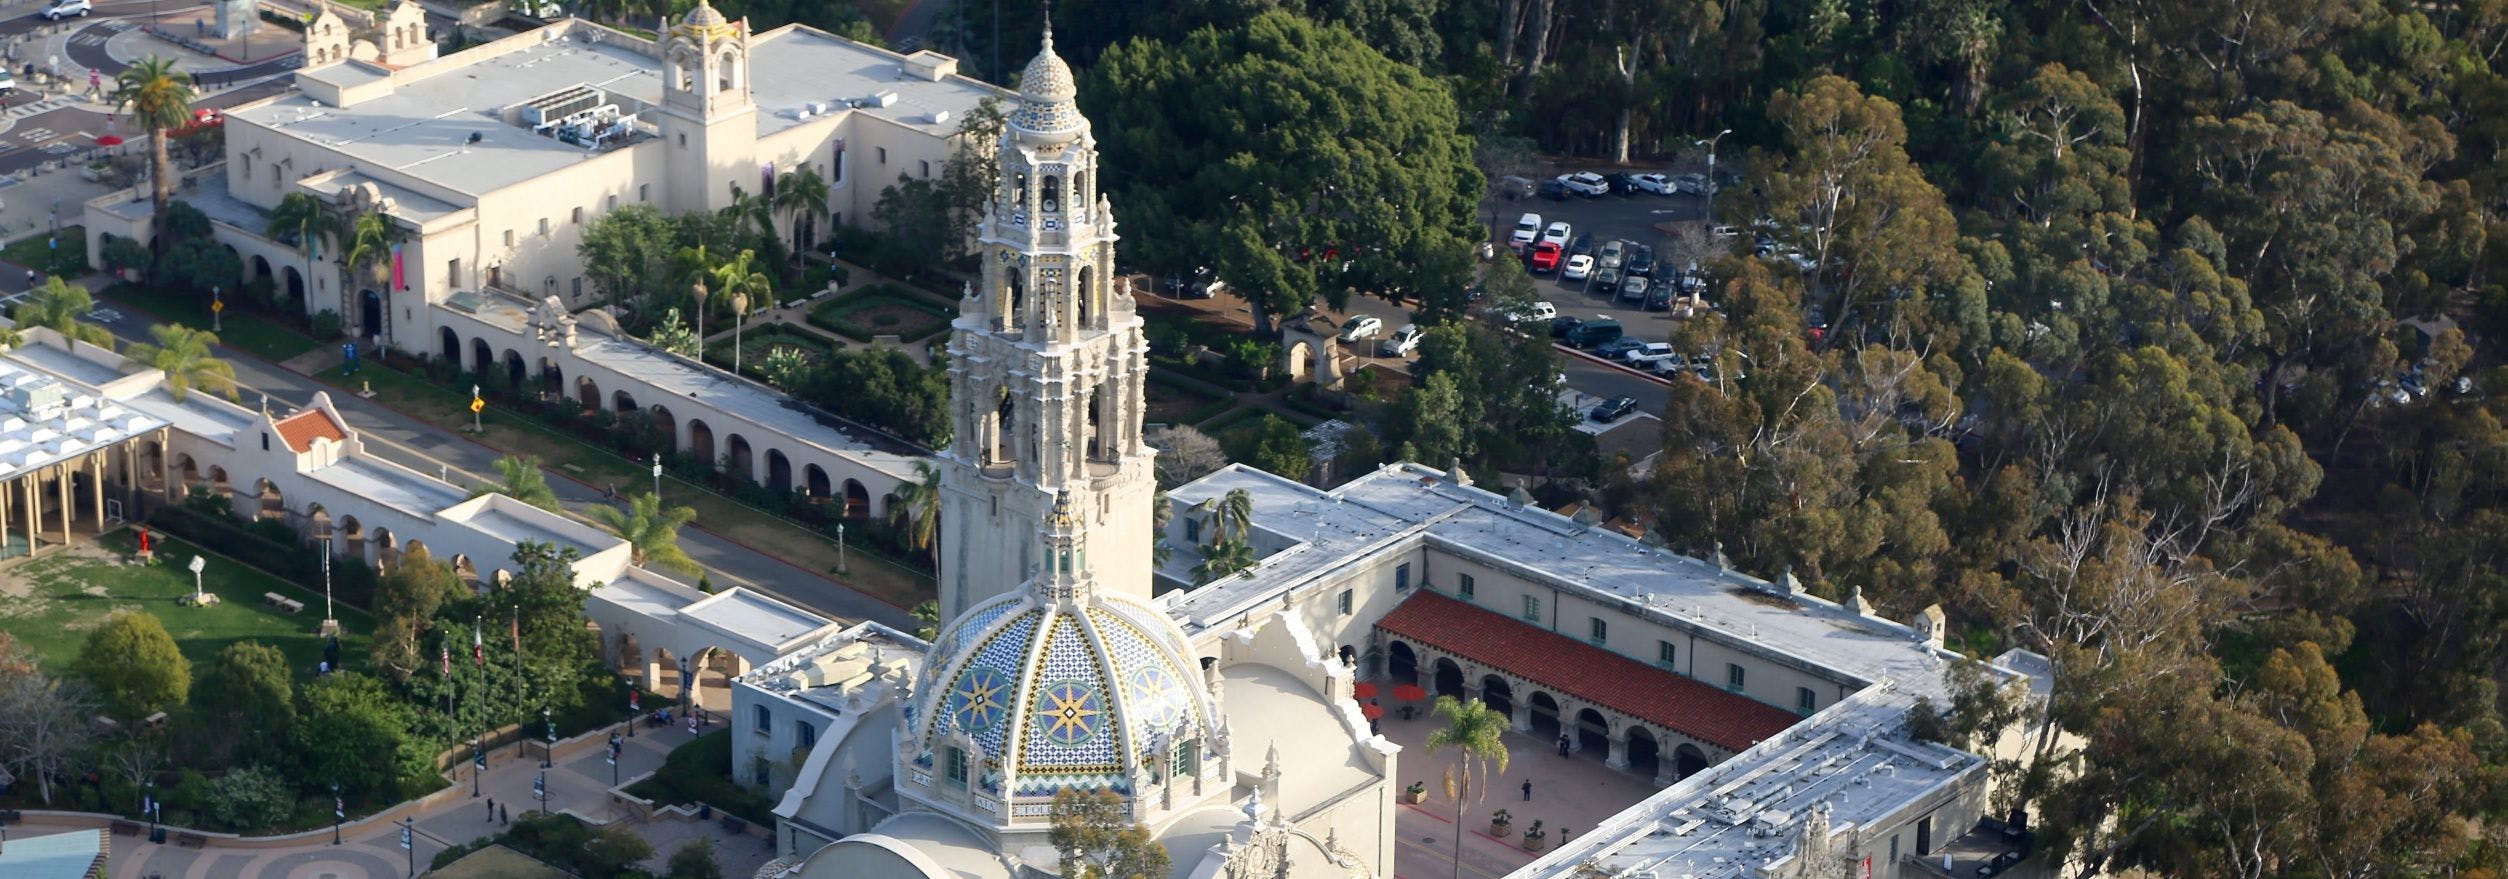 An aerial image of the Museum of Us and California Tower.